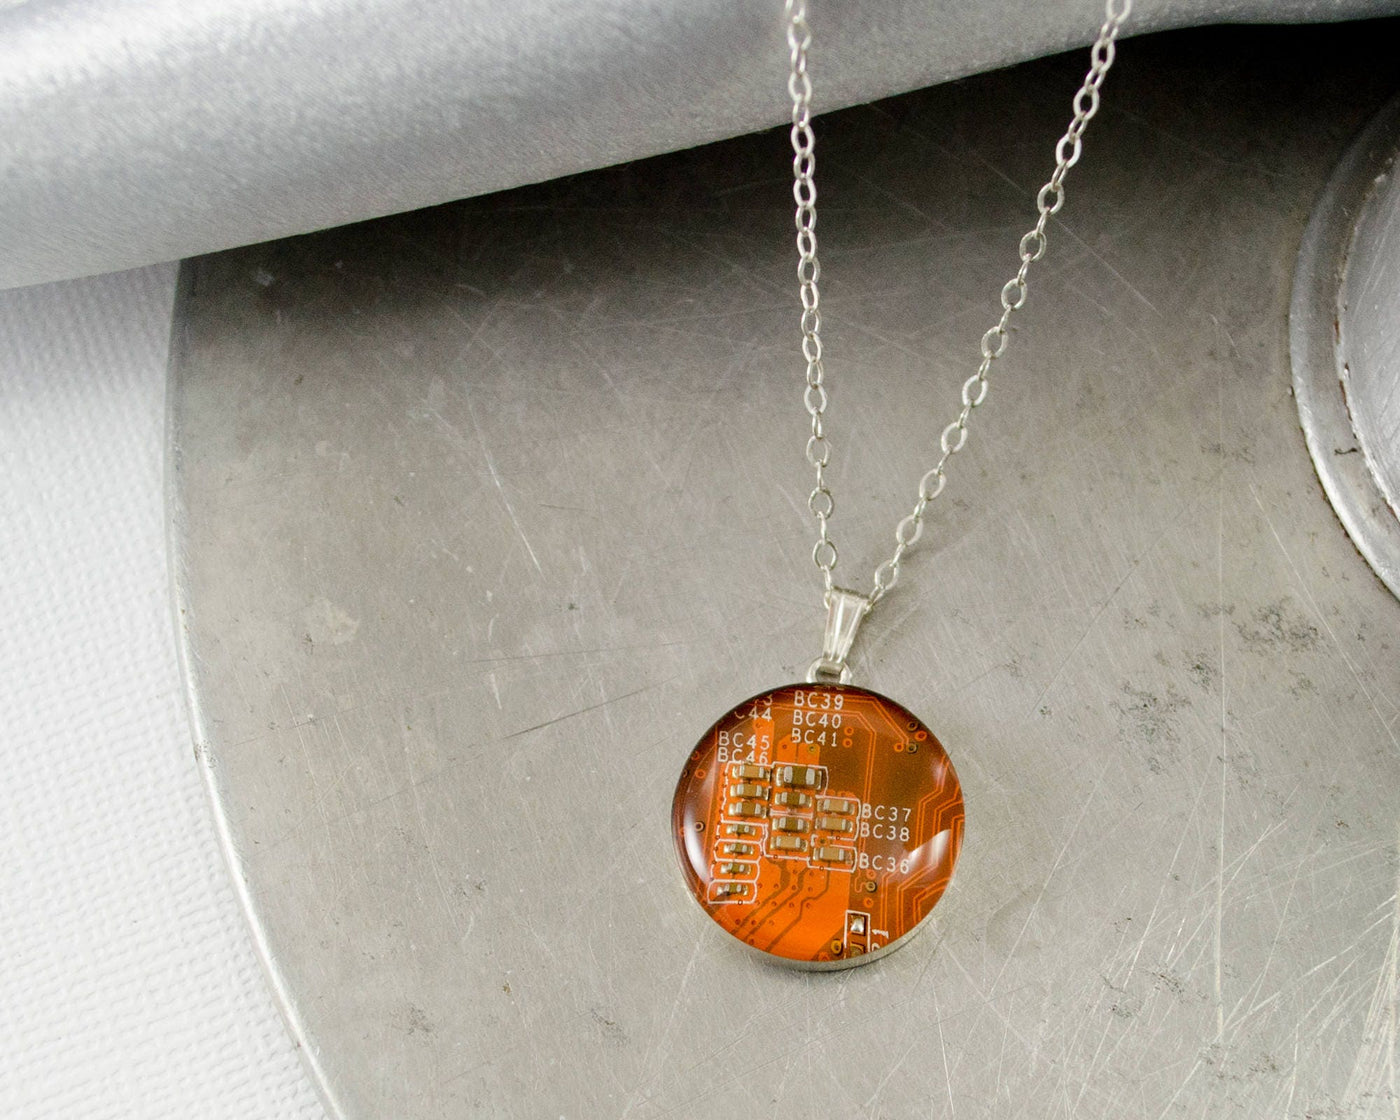 Circuit Board Necklace Orange, Sterling Silver Necklace, Royal Blue Jewelry, Wearable Technology, Computer Engineer, Science Necklace, Nerdy